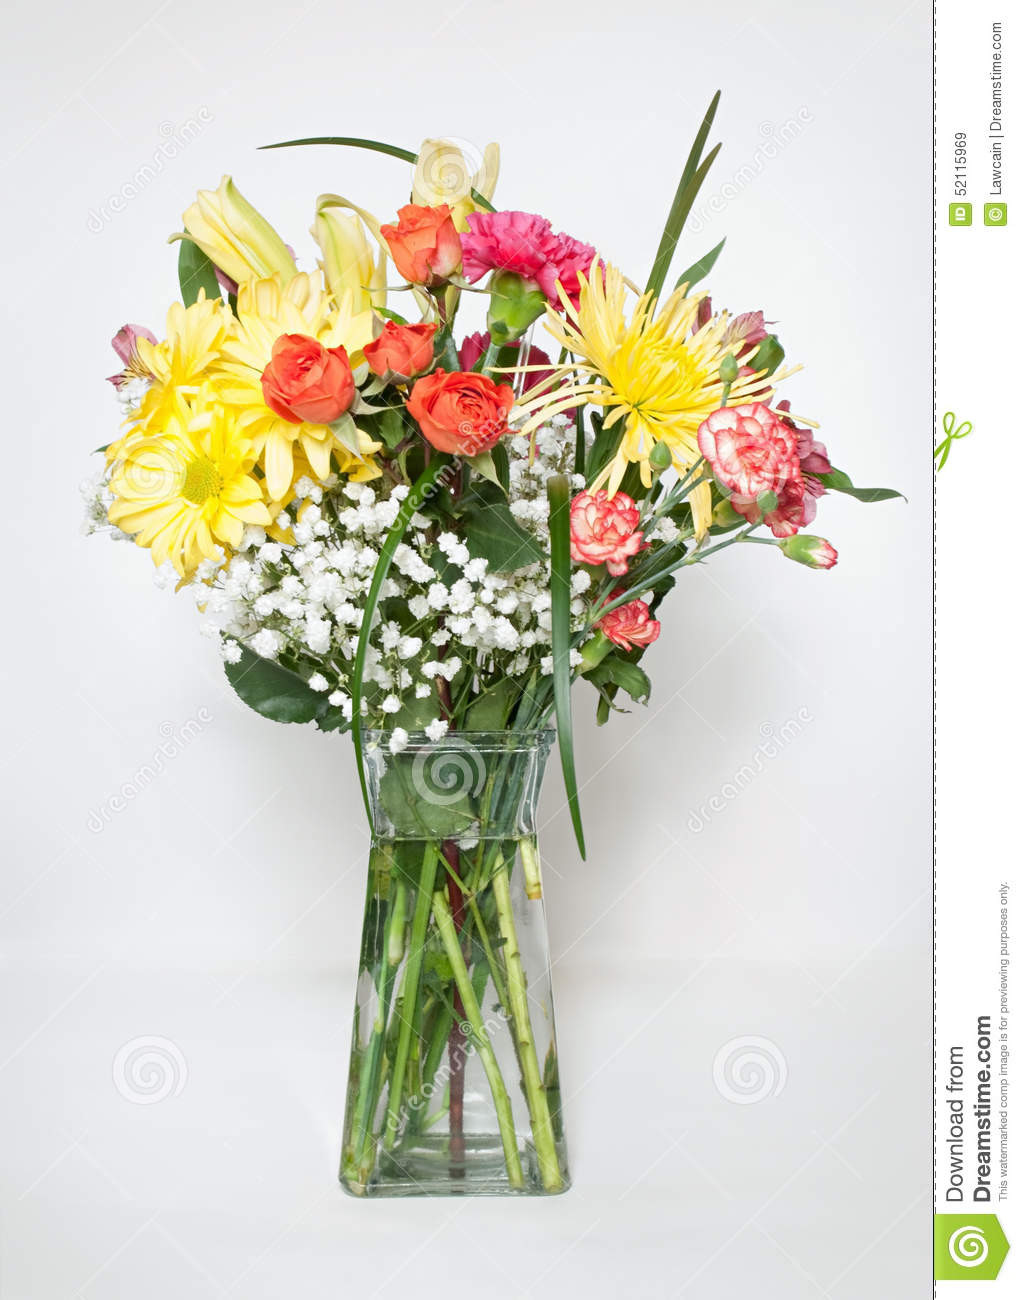 21 Famous Clear Cut Glass Vase 2022 free download clear cut glass vase of fresh spring bouquet stock image image of blossom background regarding fresh spring flower arrangement in clear glass vase on white background